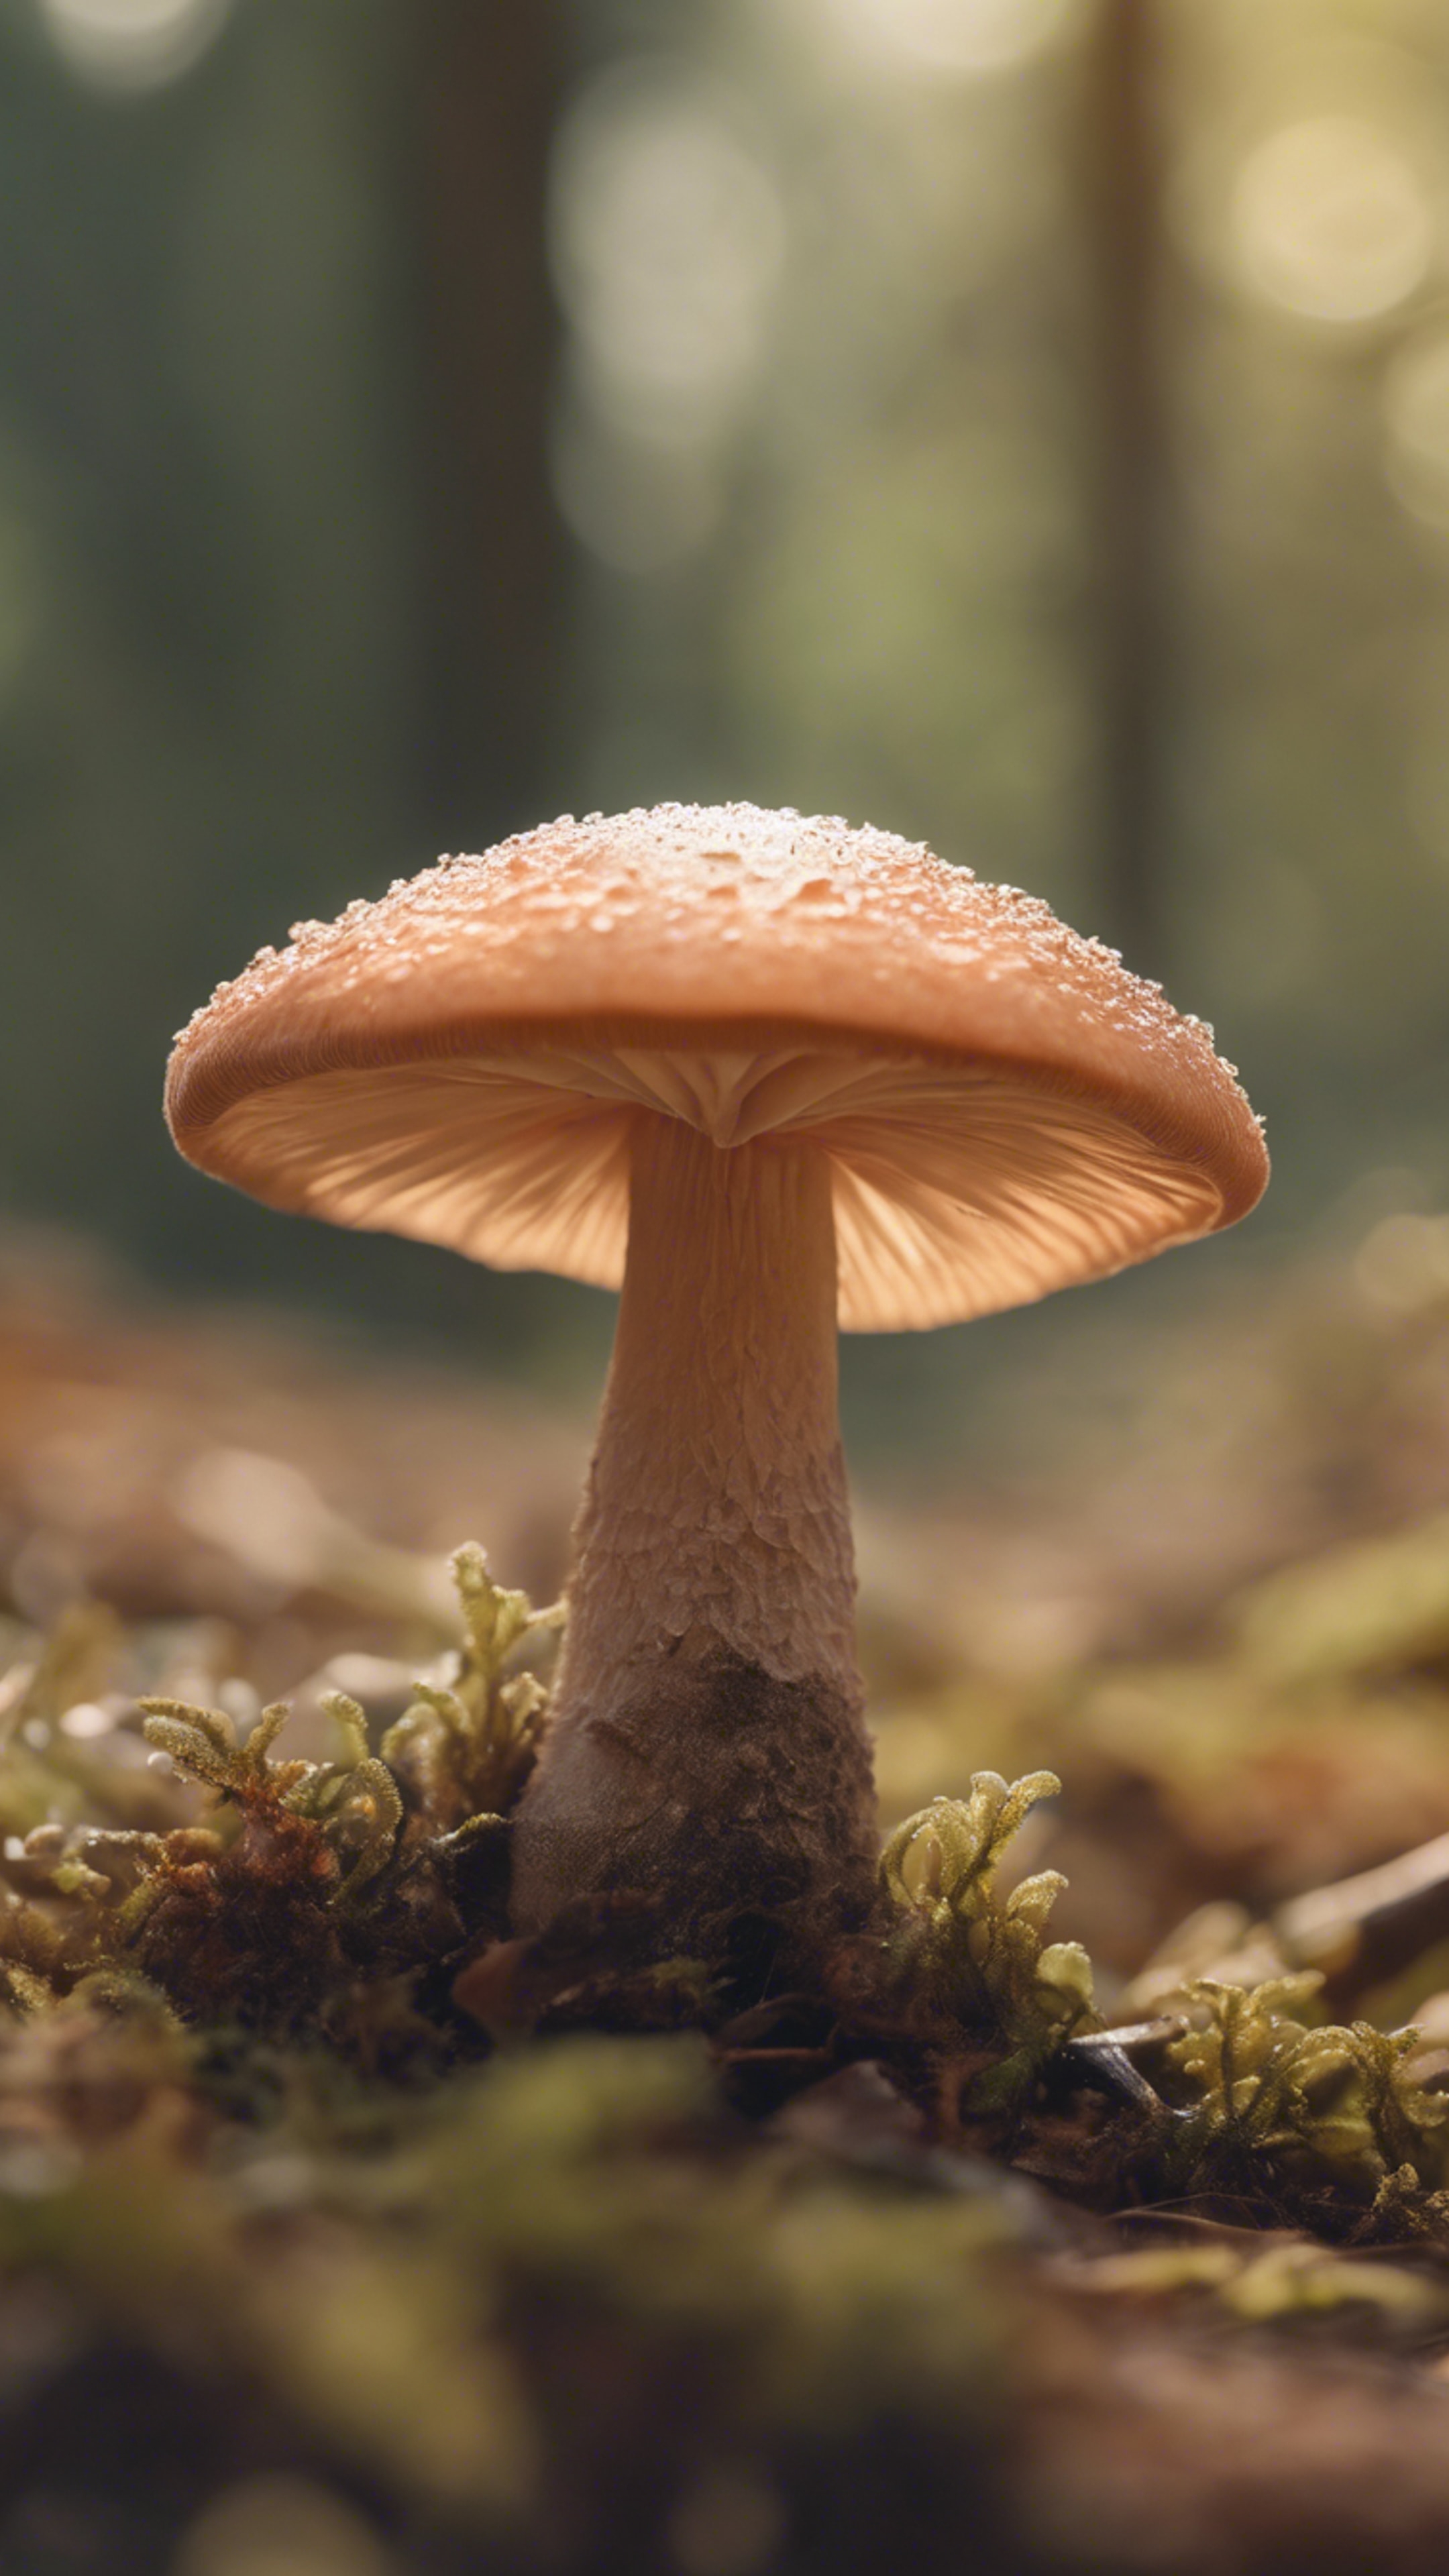 A close-up of a small, cute mushroom, peach color, with soft, sunlit forest scenery in the background. 벽지[125df3bad49b42d8bf38]